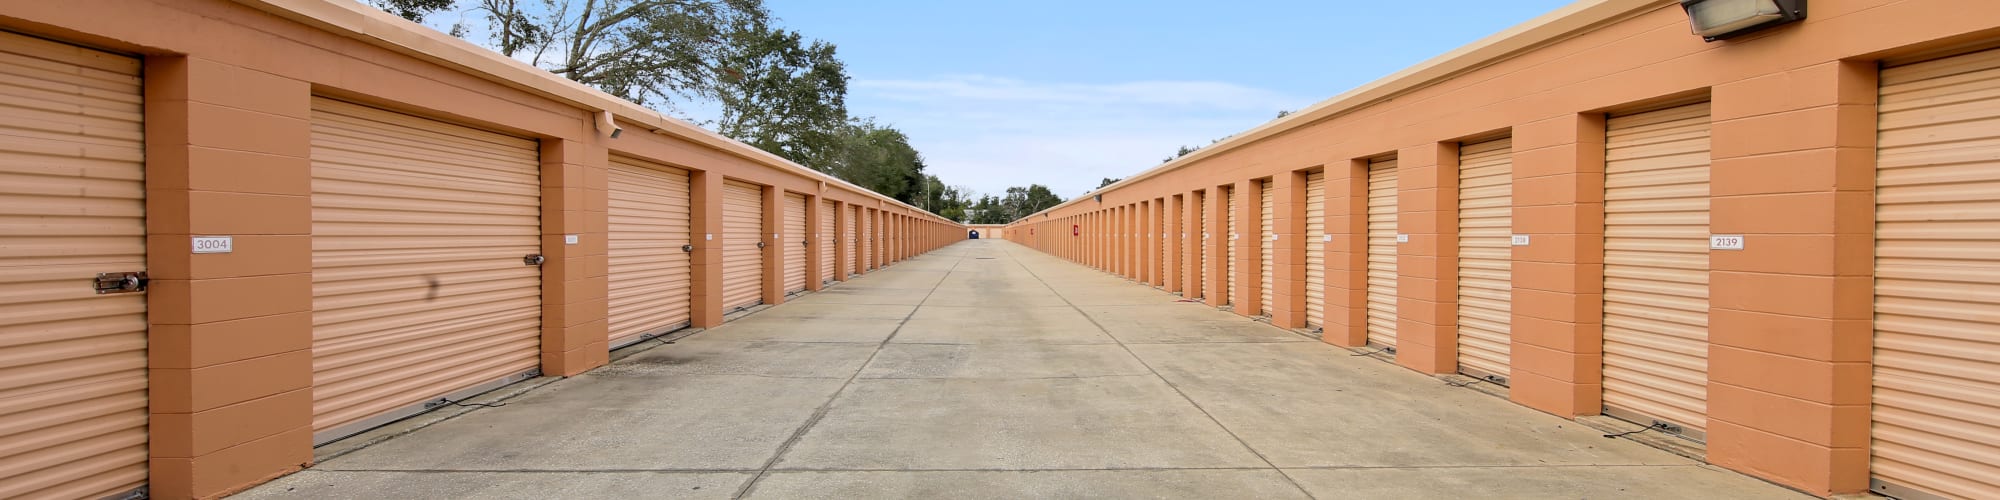 Unit sizes and prices for My Neighborhood Storage Center in Orlando, Florida